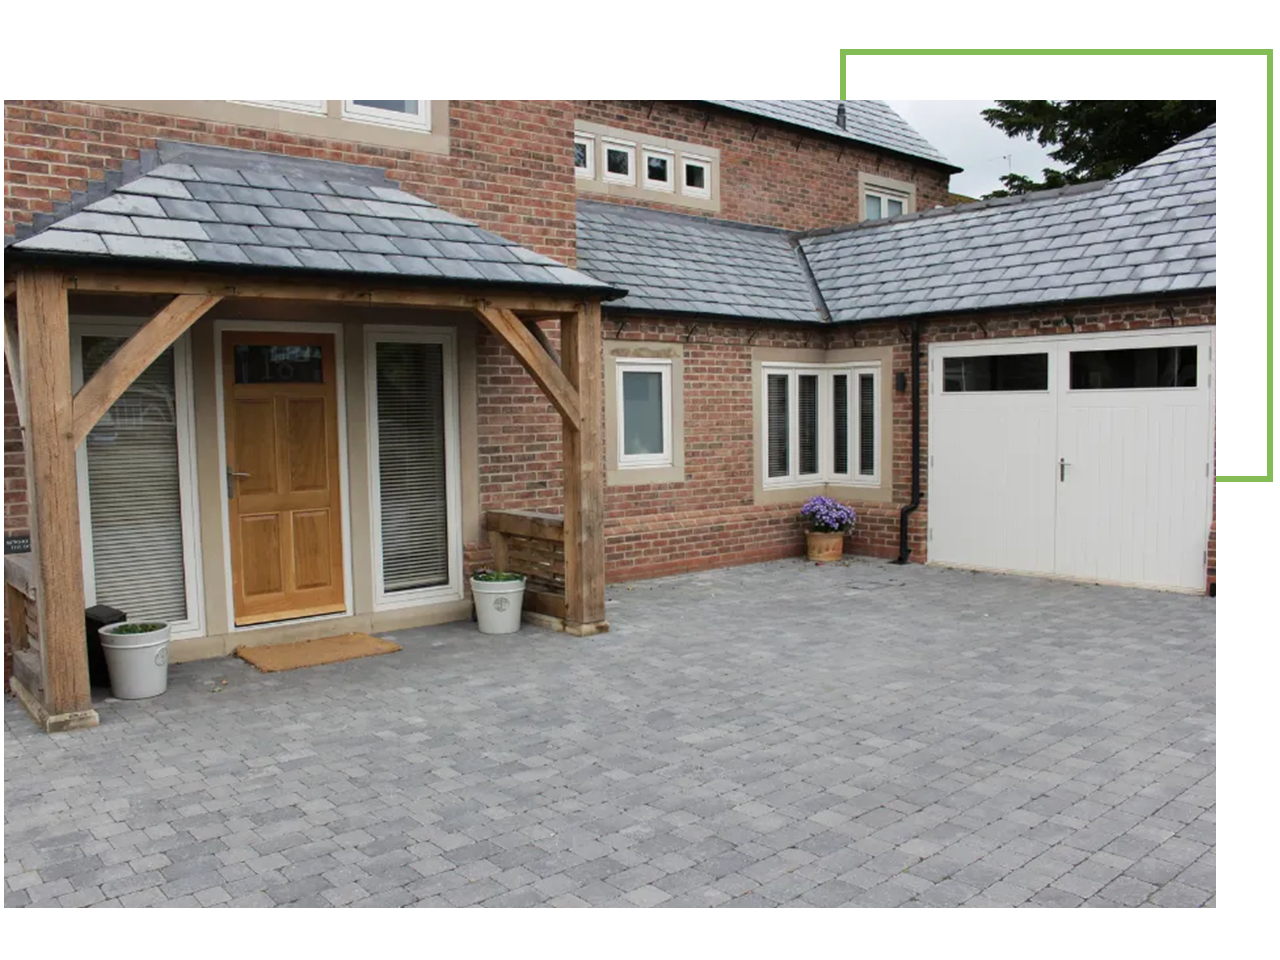 Specialist Garage Doors - Central Joinery Group